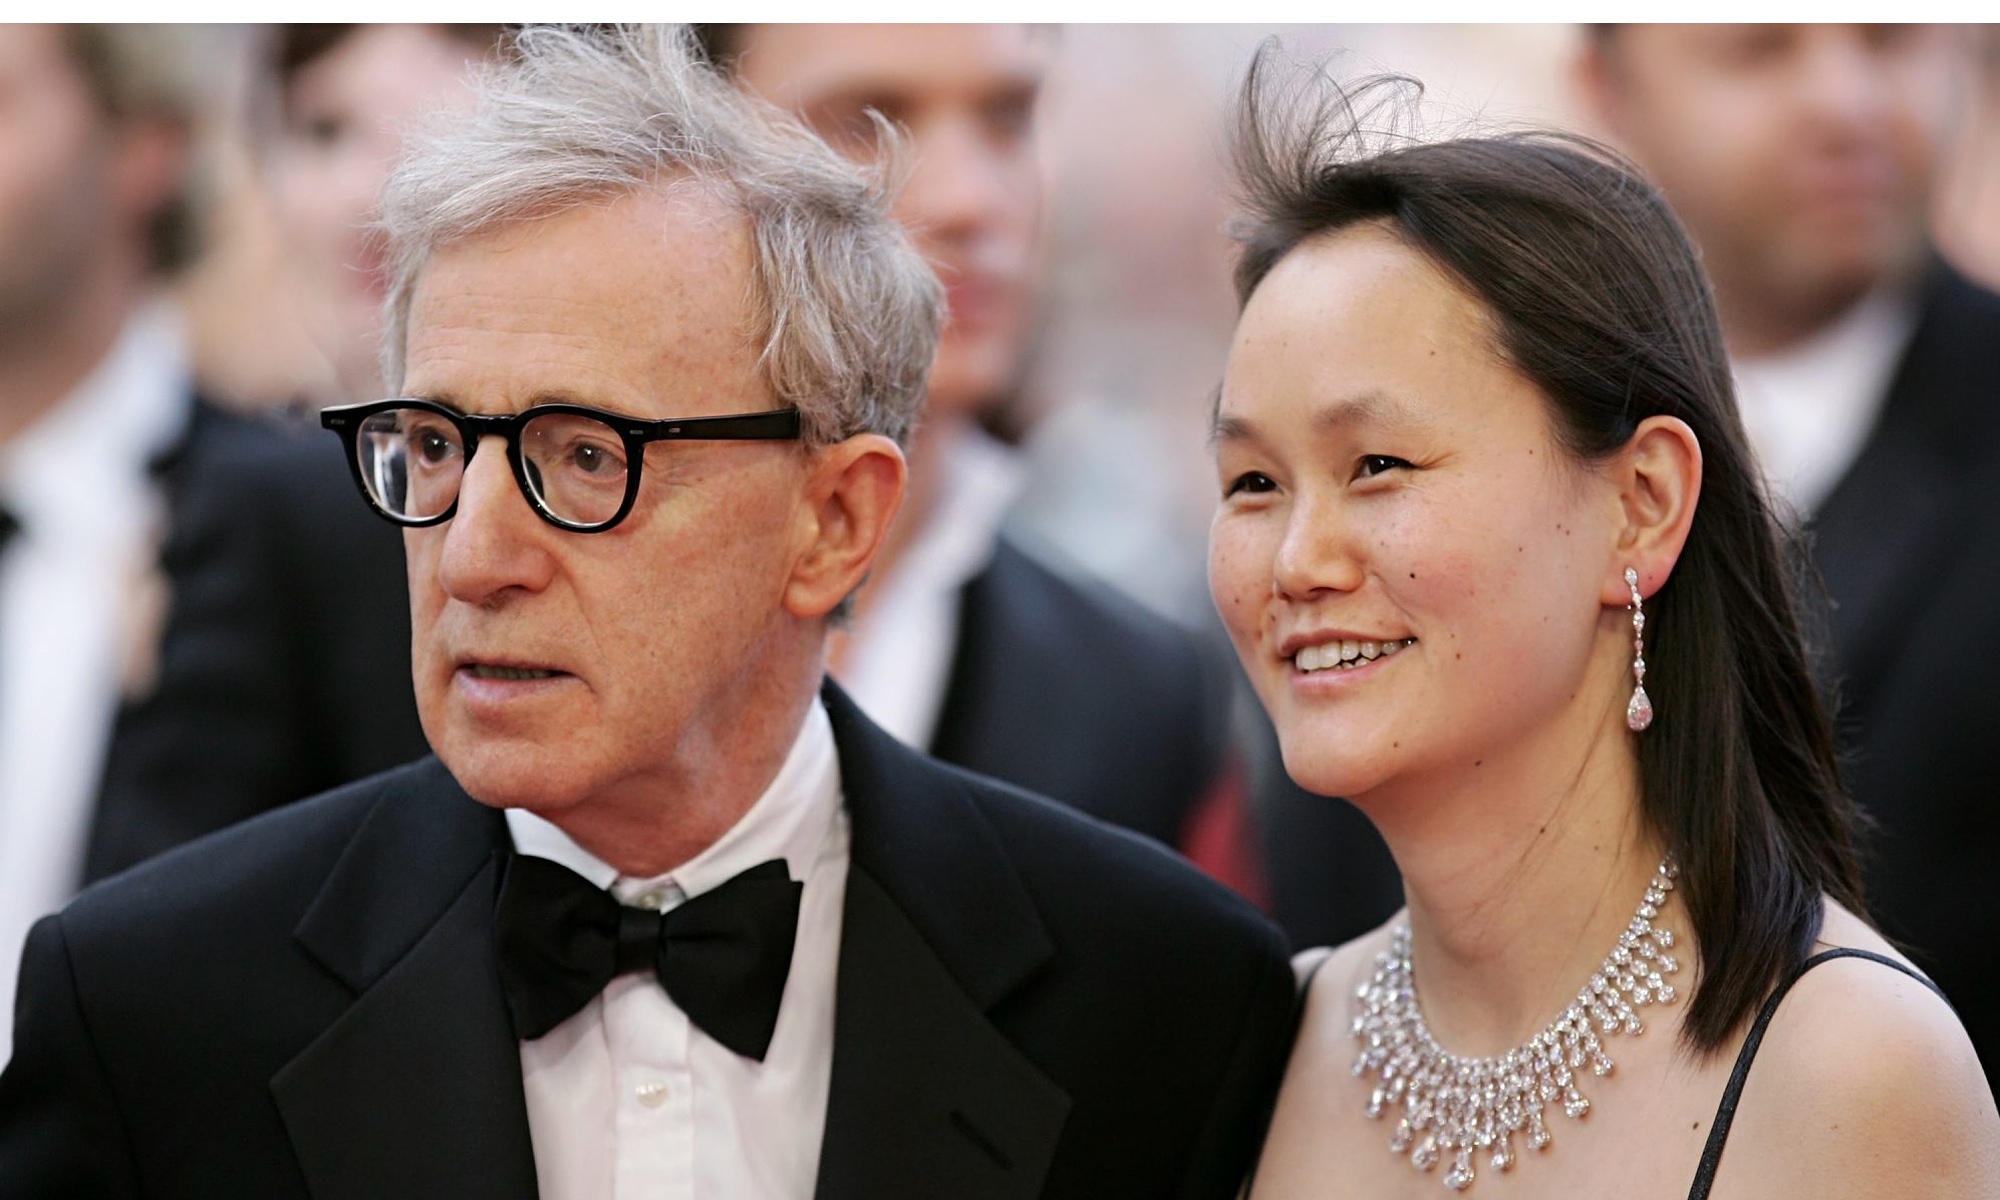 Between labelling Woody Allen a child molester or his daughter a liar ...